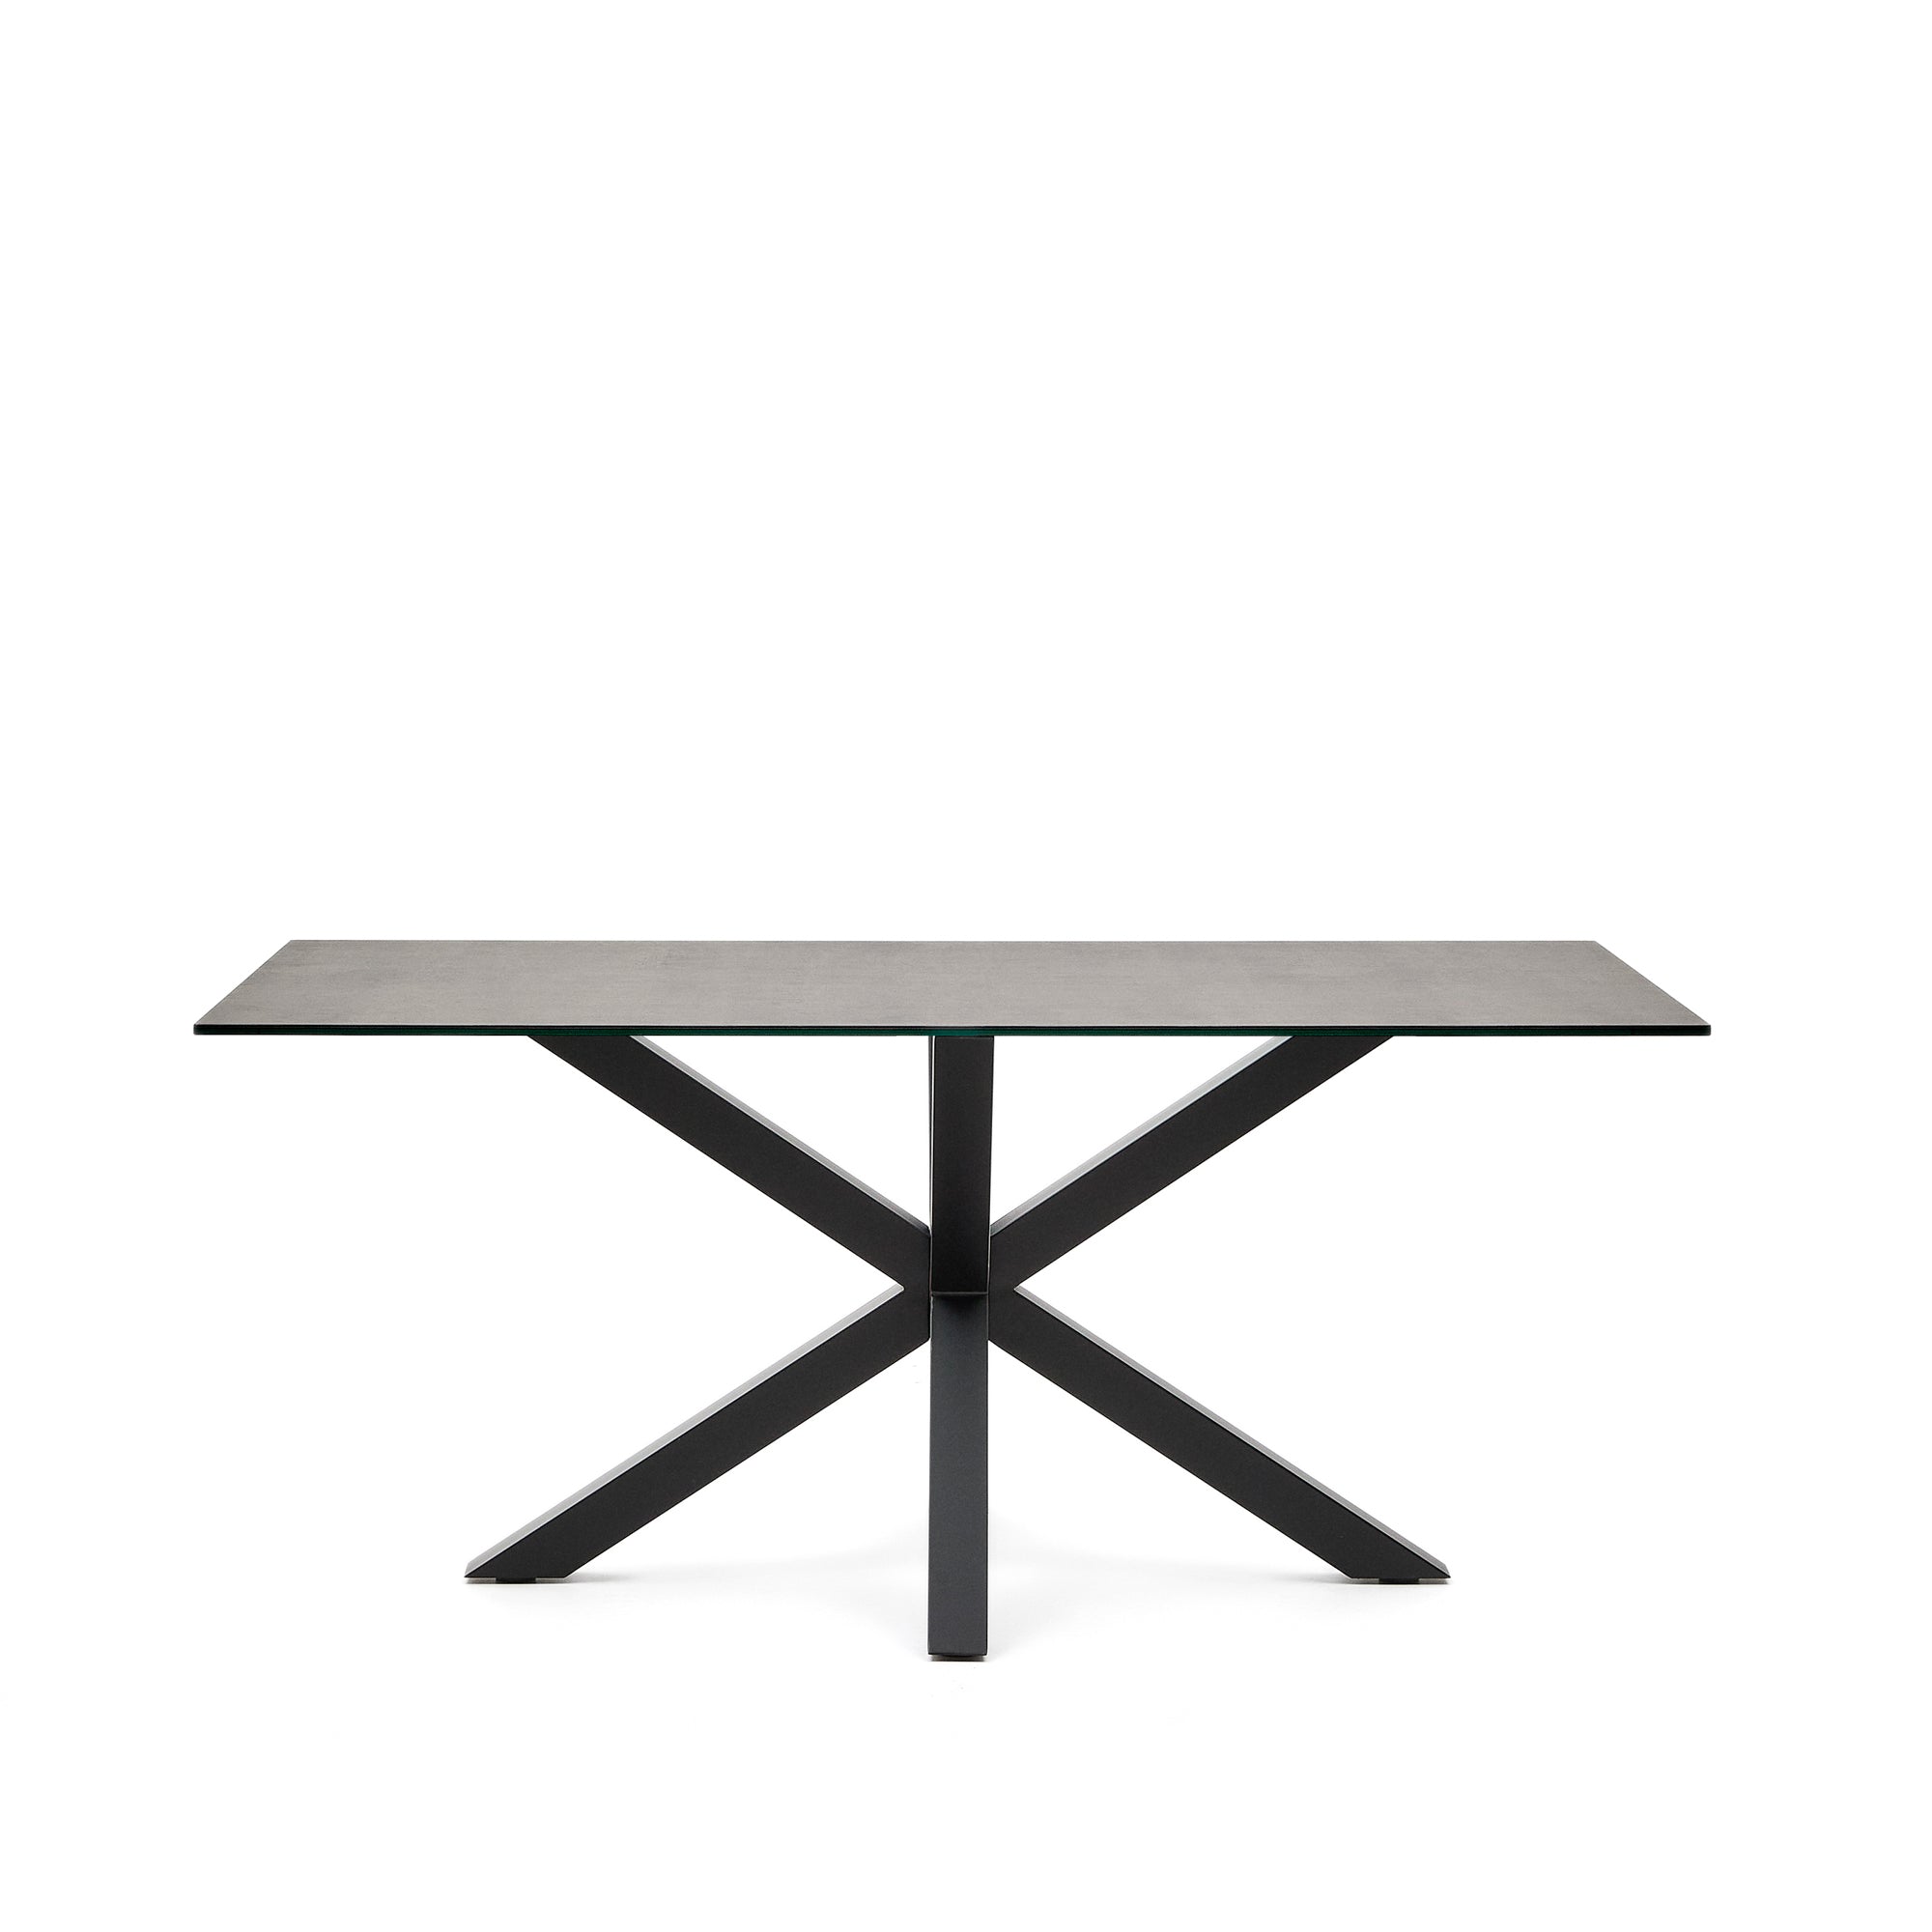 Argo table in Iron Moss porcelain and steel legs with black finish, 160 x 90 cm